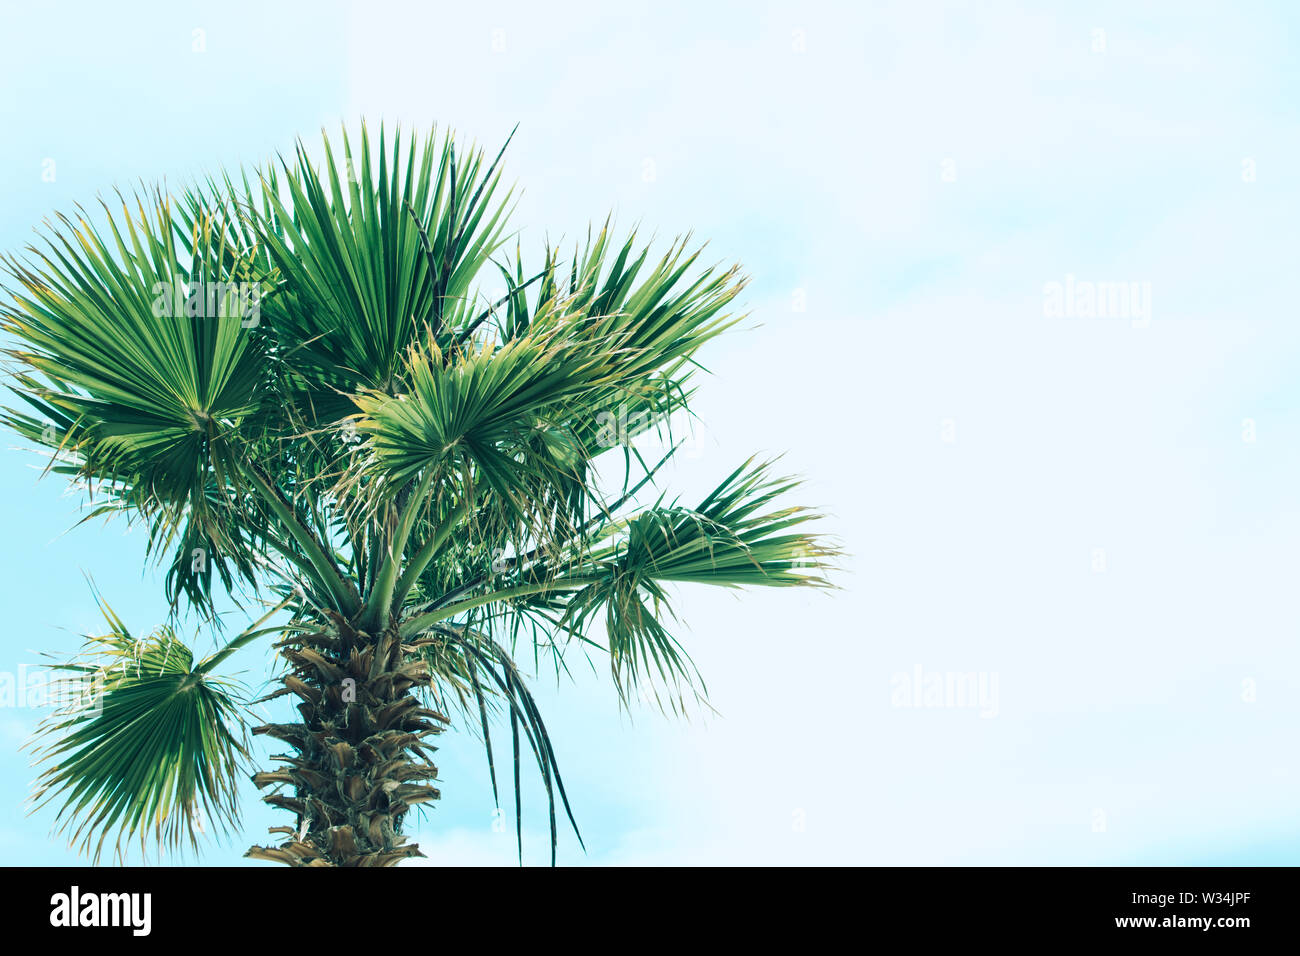 Green foliage of tall palm trees on background of the sky. Livistona Rotundifolia or fan palm. Place for text. Stock Photo